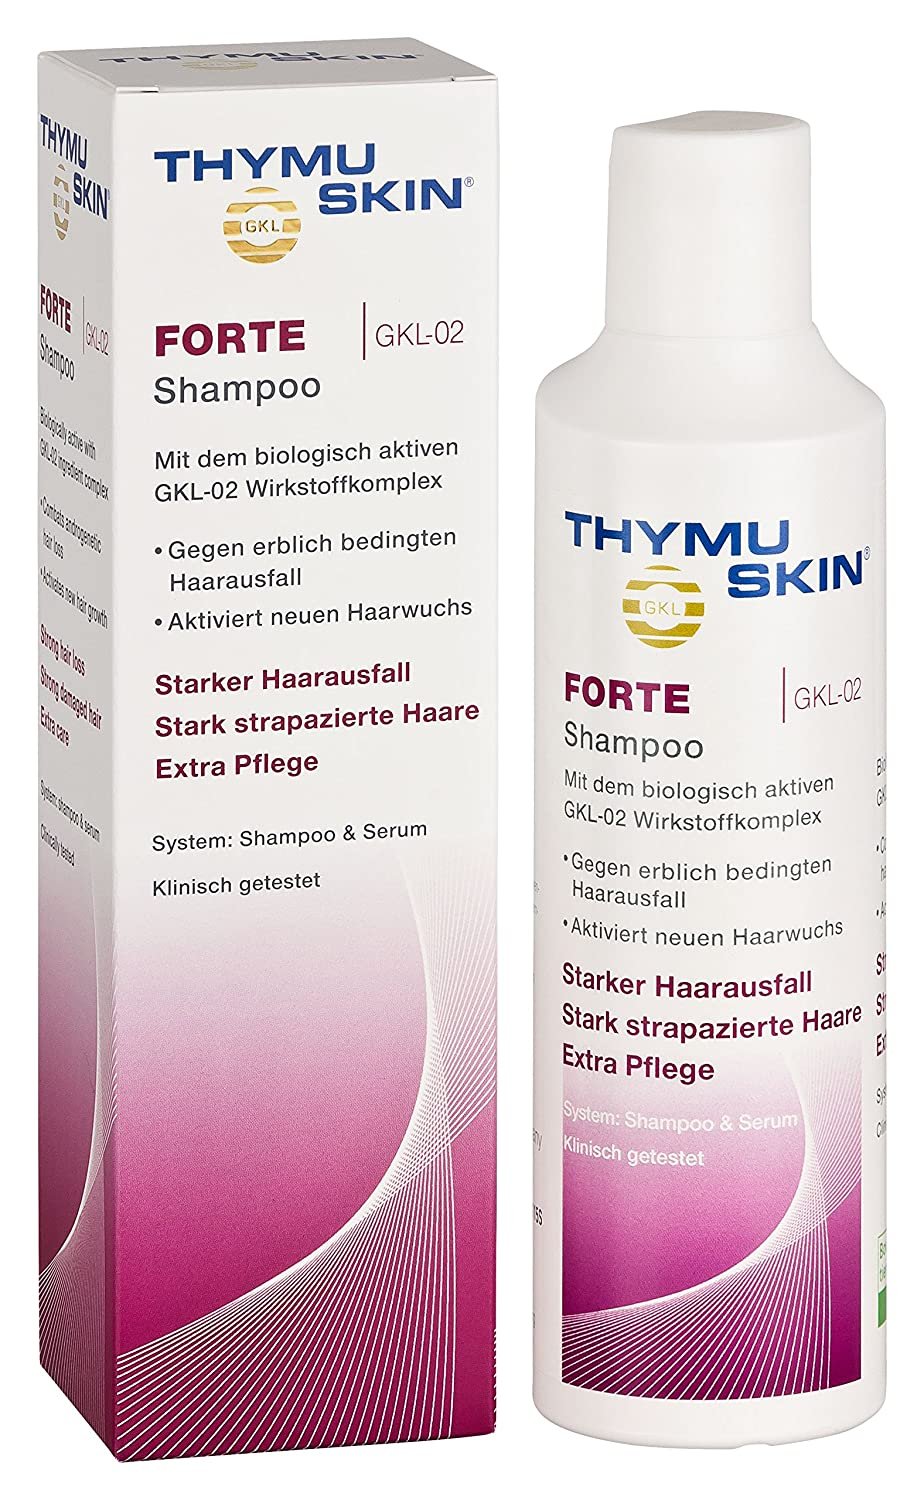 THYMUSKIN Forte Shampoo Cleanser (Step #1) Therapy for Very Strong Thinning and Hair Loss to Nourishing, Reinforcement, and Strengthening Hair.